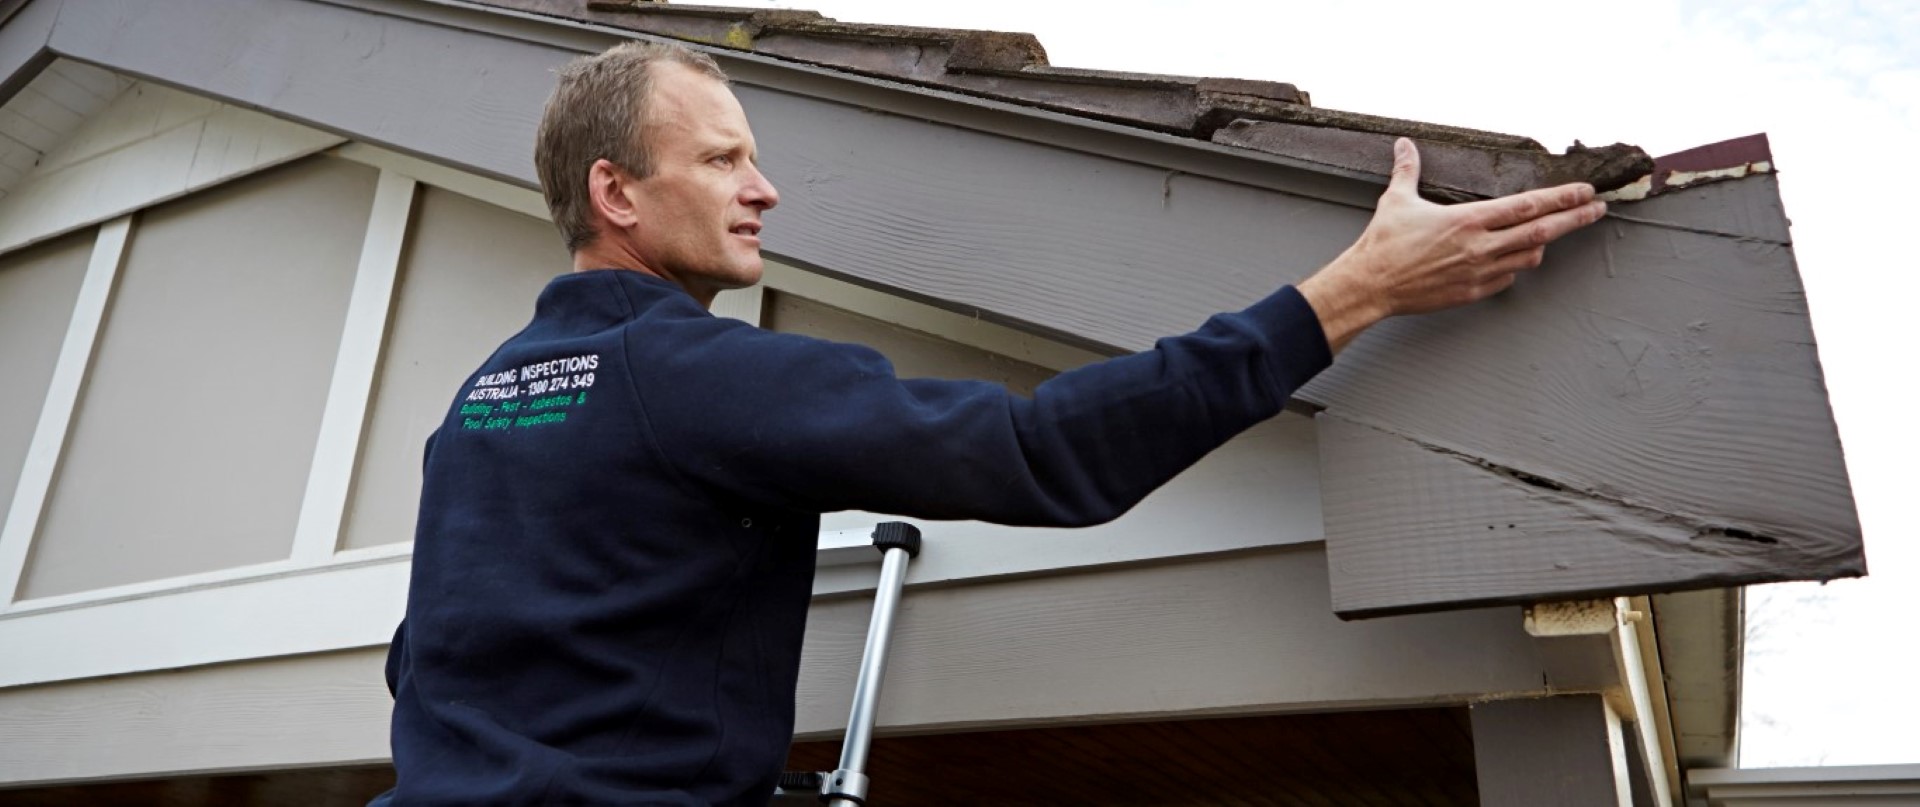 Building Inspections in Cranbourne, Western Port and the Mornington Peninsula